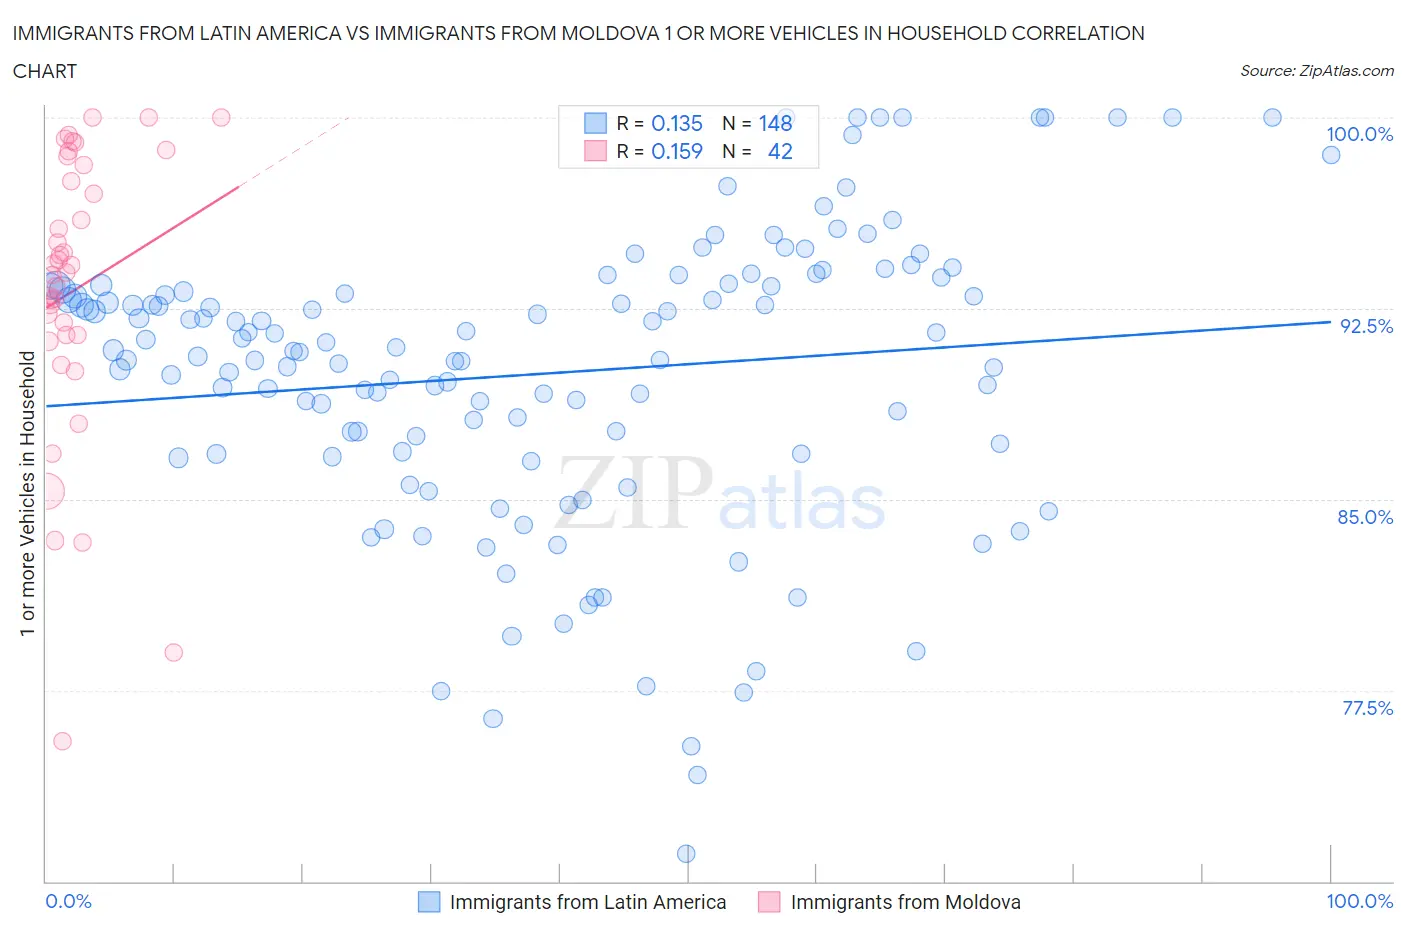 Immigrants from Latin America vs Immigrants from Moldova 1 or more Vehicles in Household